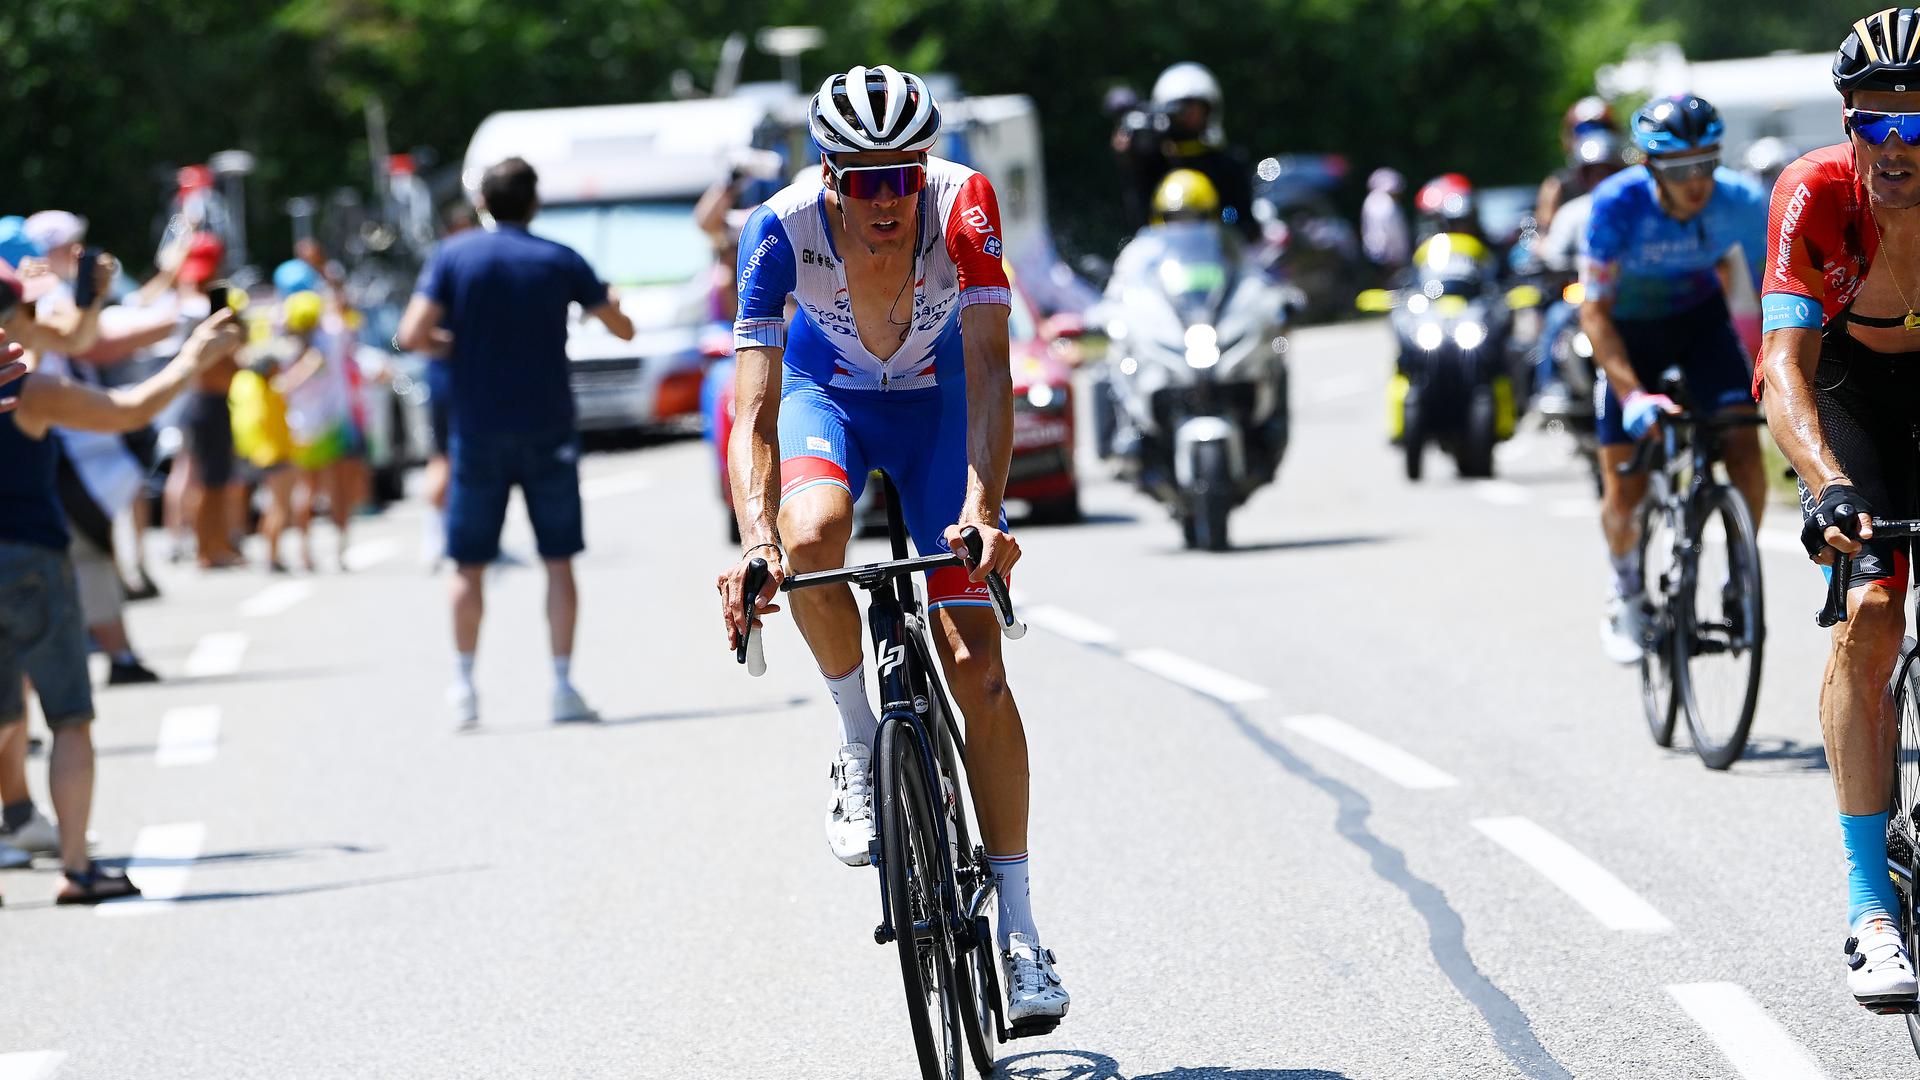 HAUTACAM, FRANCE - JULY 21: Kevin Geniets of Luxembourg and Team Groupama - FDJ during the 109th Tour de France 2022, Stage 18 a 143,2km stage from Lourdes to Hautacam 1520m / #TDF2022 / #WorldTour / on July 21, 2022 in Hautacam, France. (Photo by Tim de Waele/Getty Images)